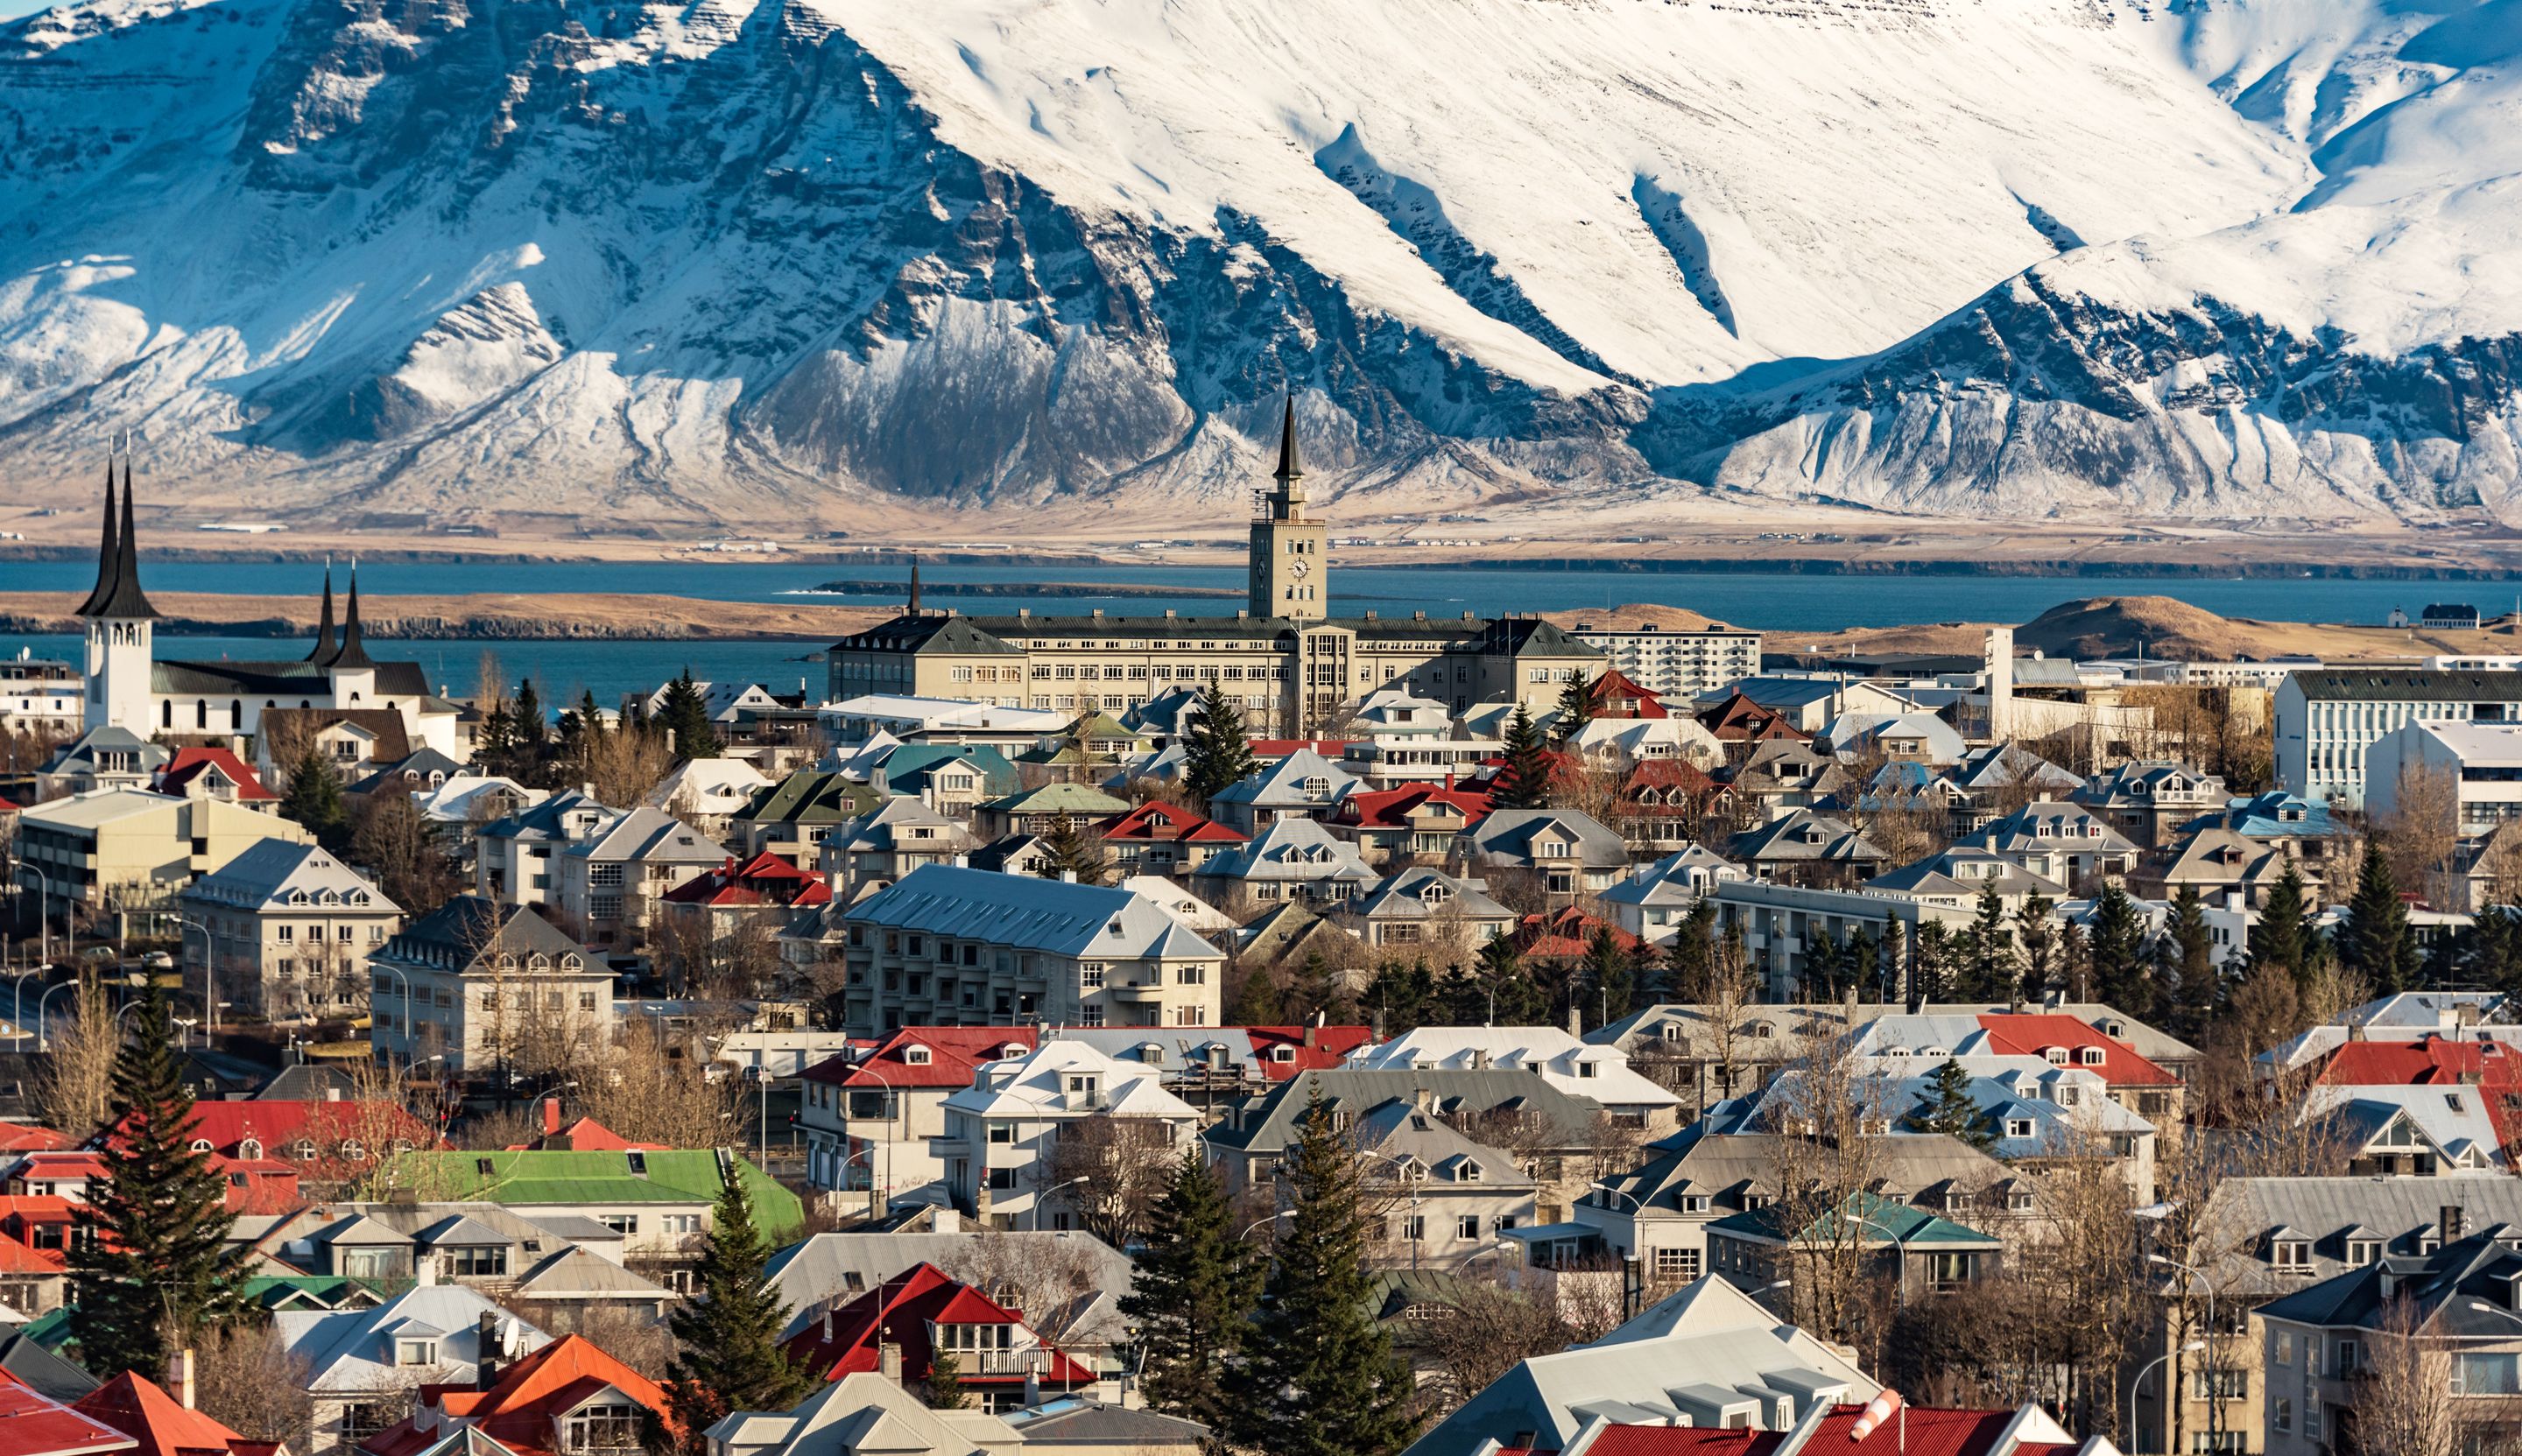 reykjavik, the capital of iceland and its exceptional landscape